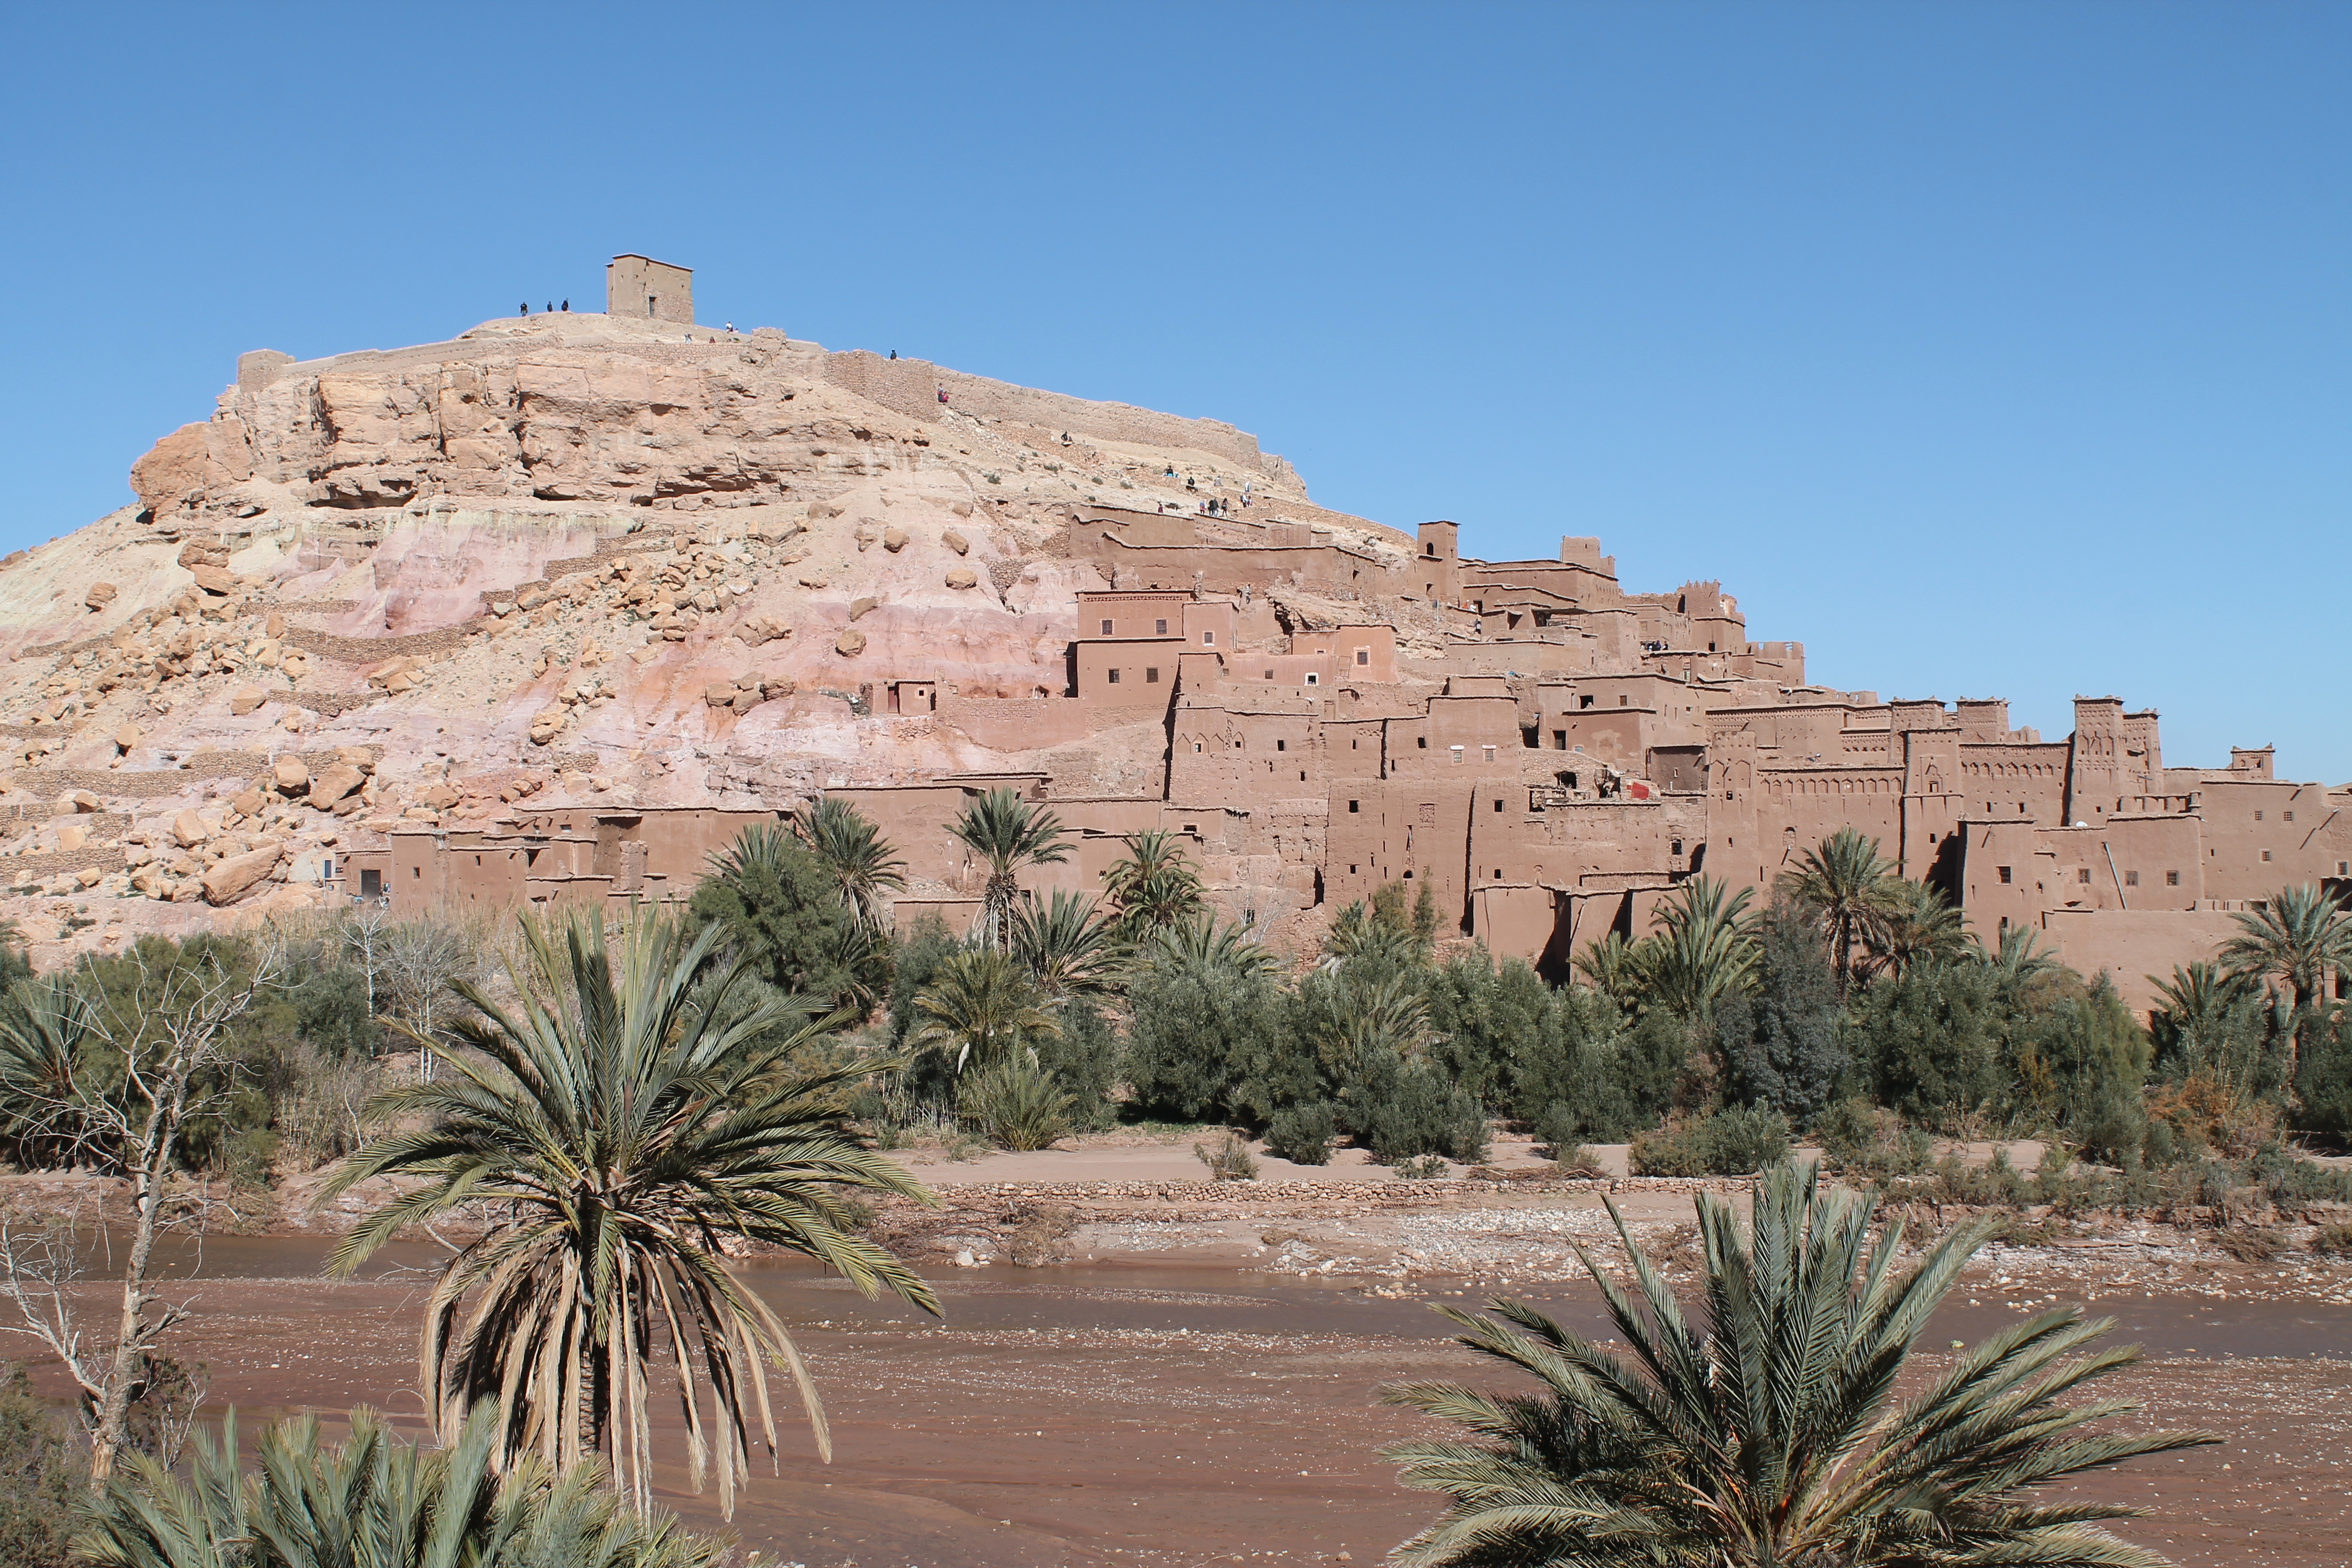 Visit Ait Benhaddou - Game of Thrones Film Location - One of the Awesome Things to Do in Morocco